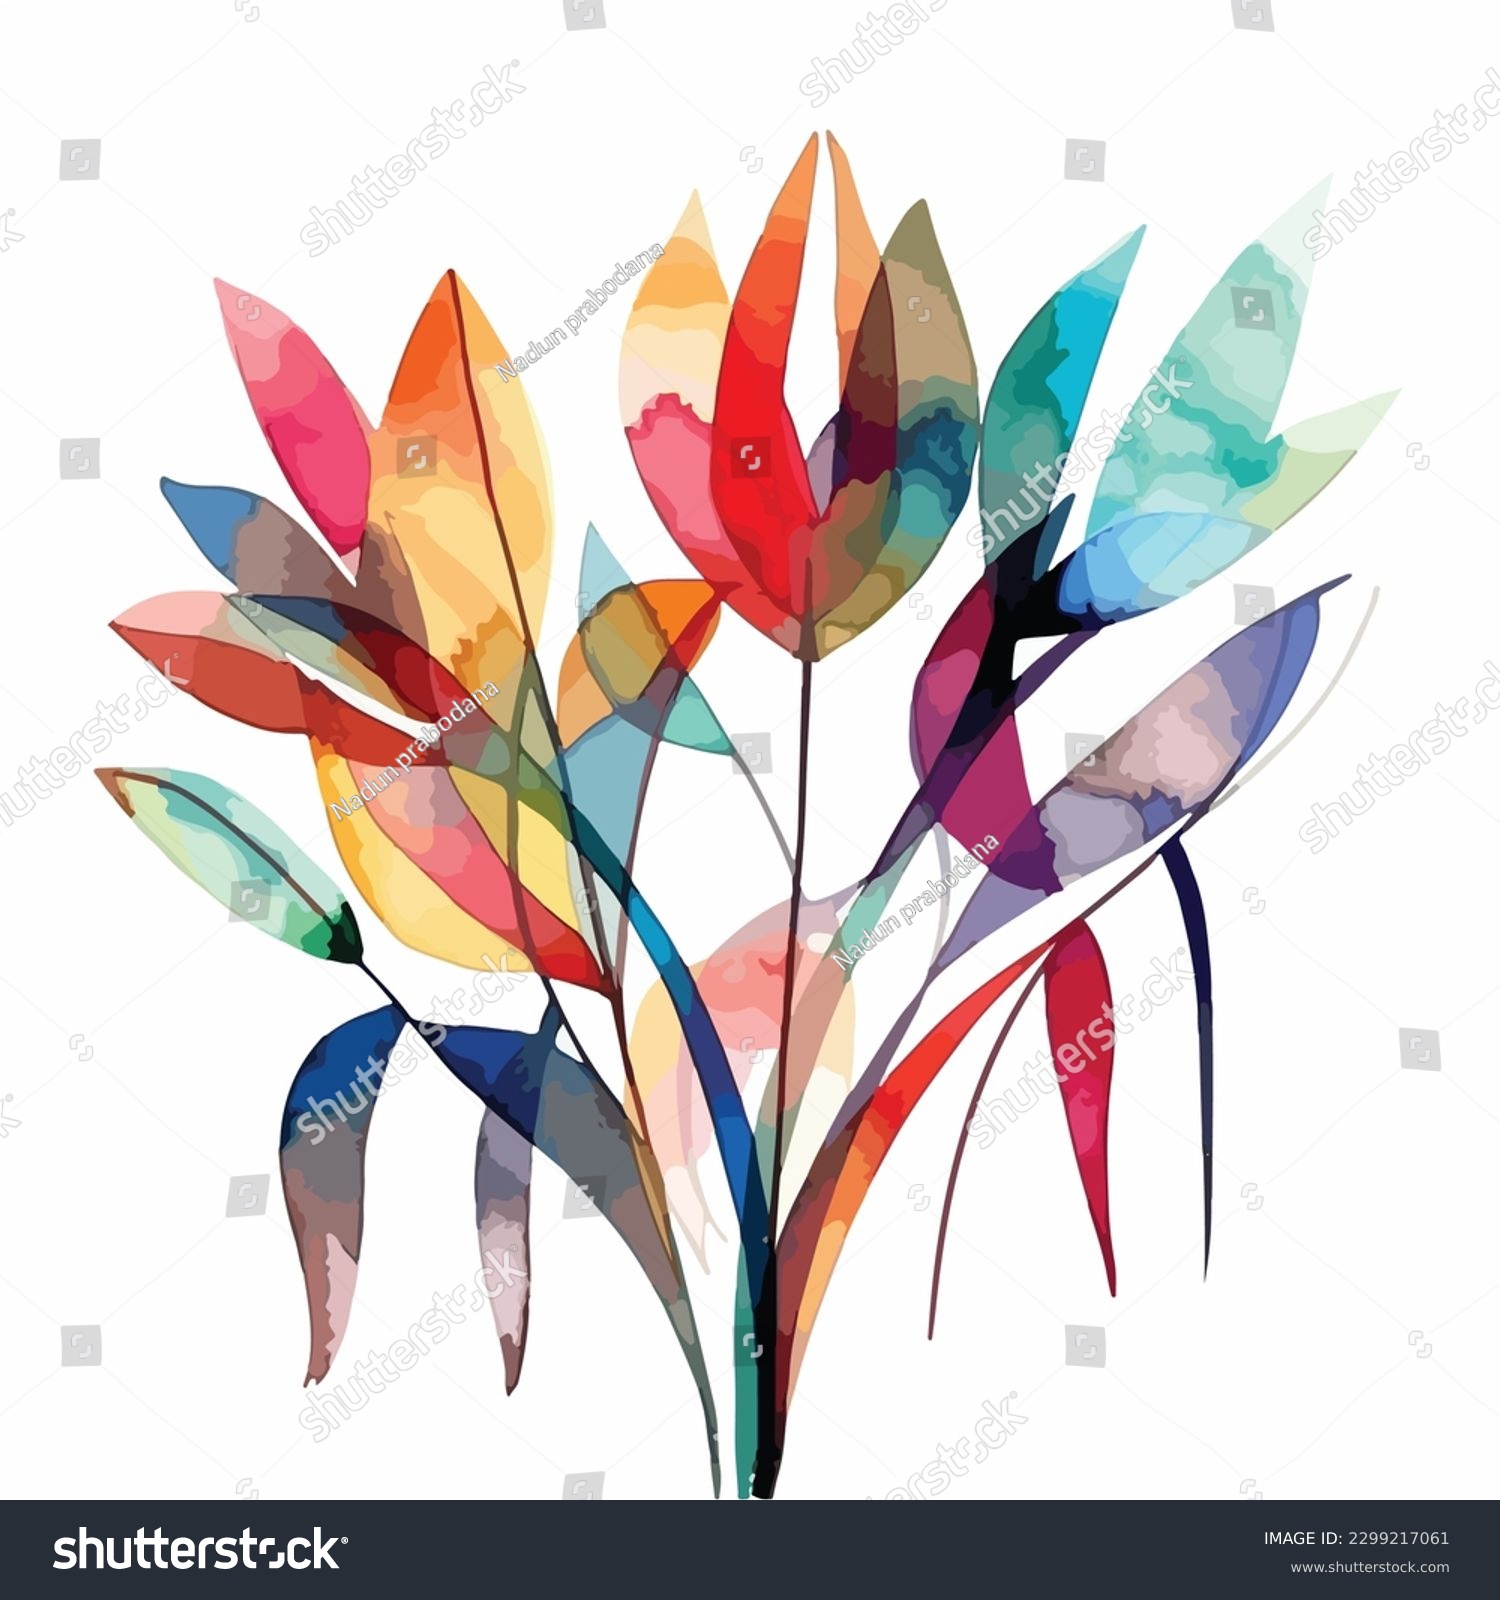 SVG of abstract watercolor colorful flower, white background, flat colors, vector illustration, digital art svg